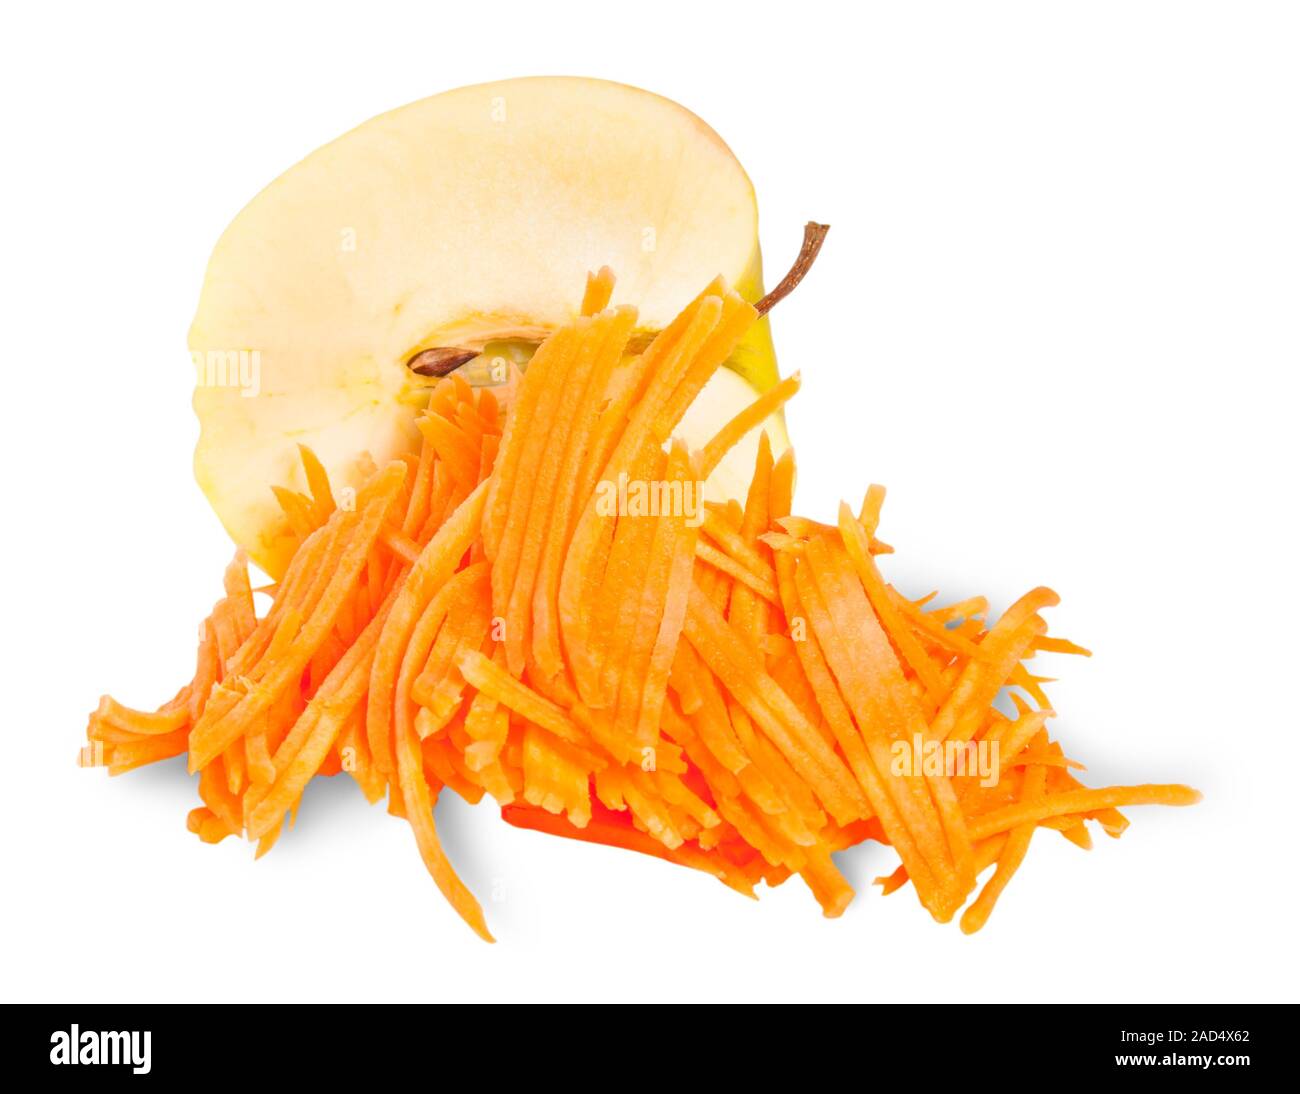 Half An Apple With Grated Carrot Stock Photo